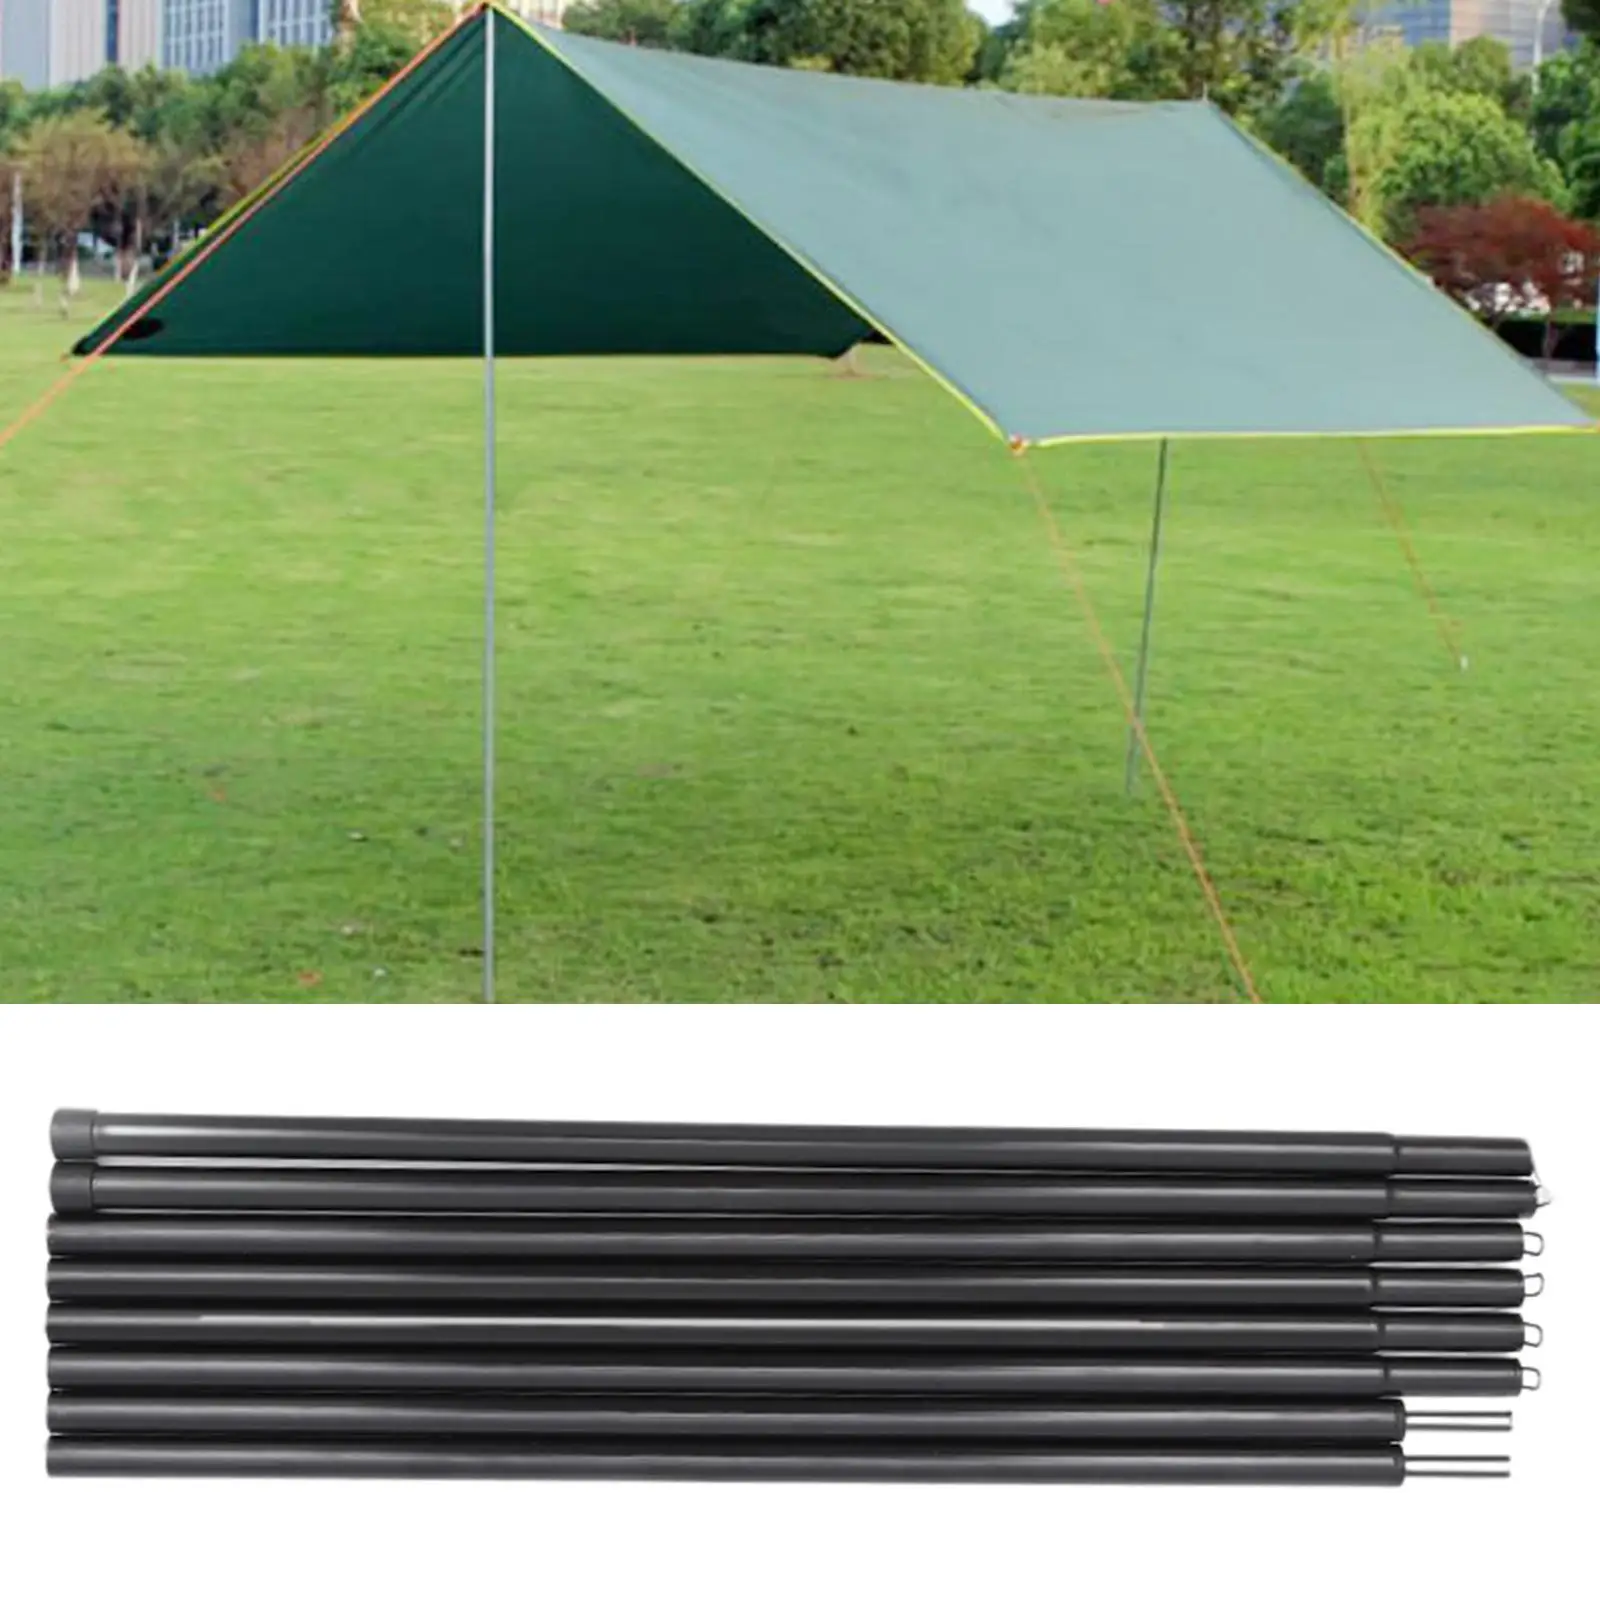 Tent Support Rod Extendable Heat Resisting Canopy Pole Set for Hiking Tarp Awning